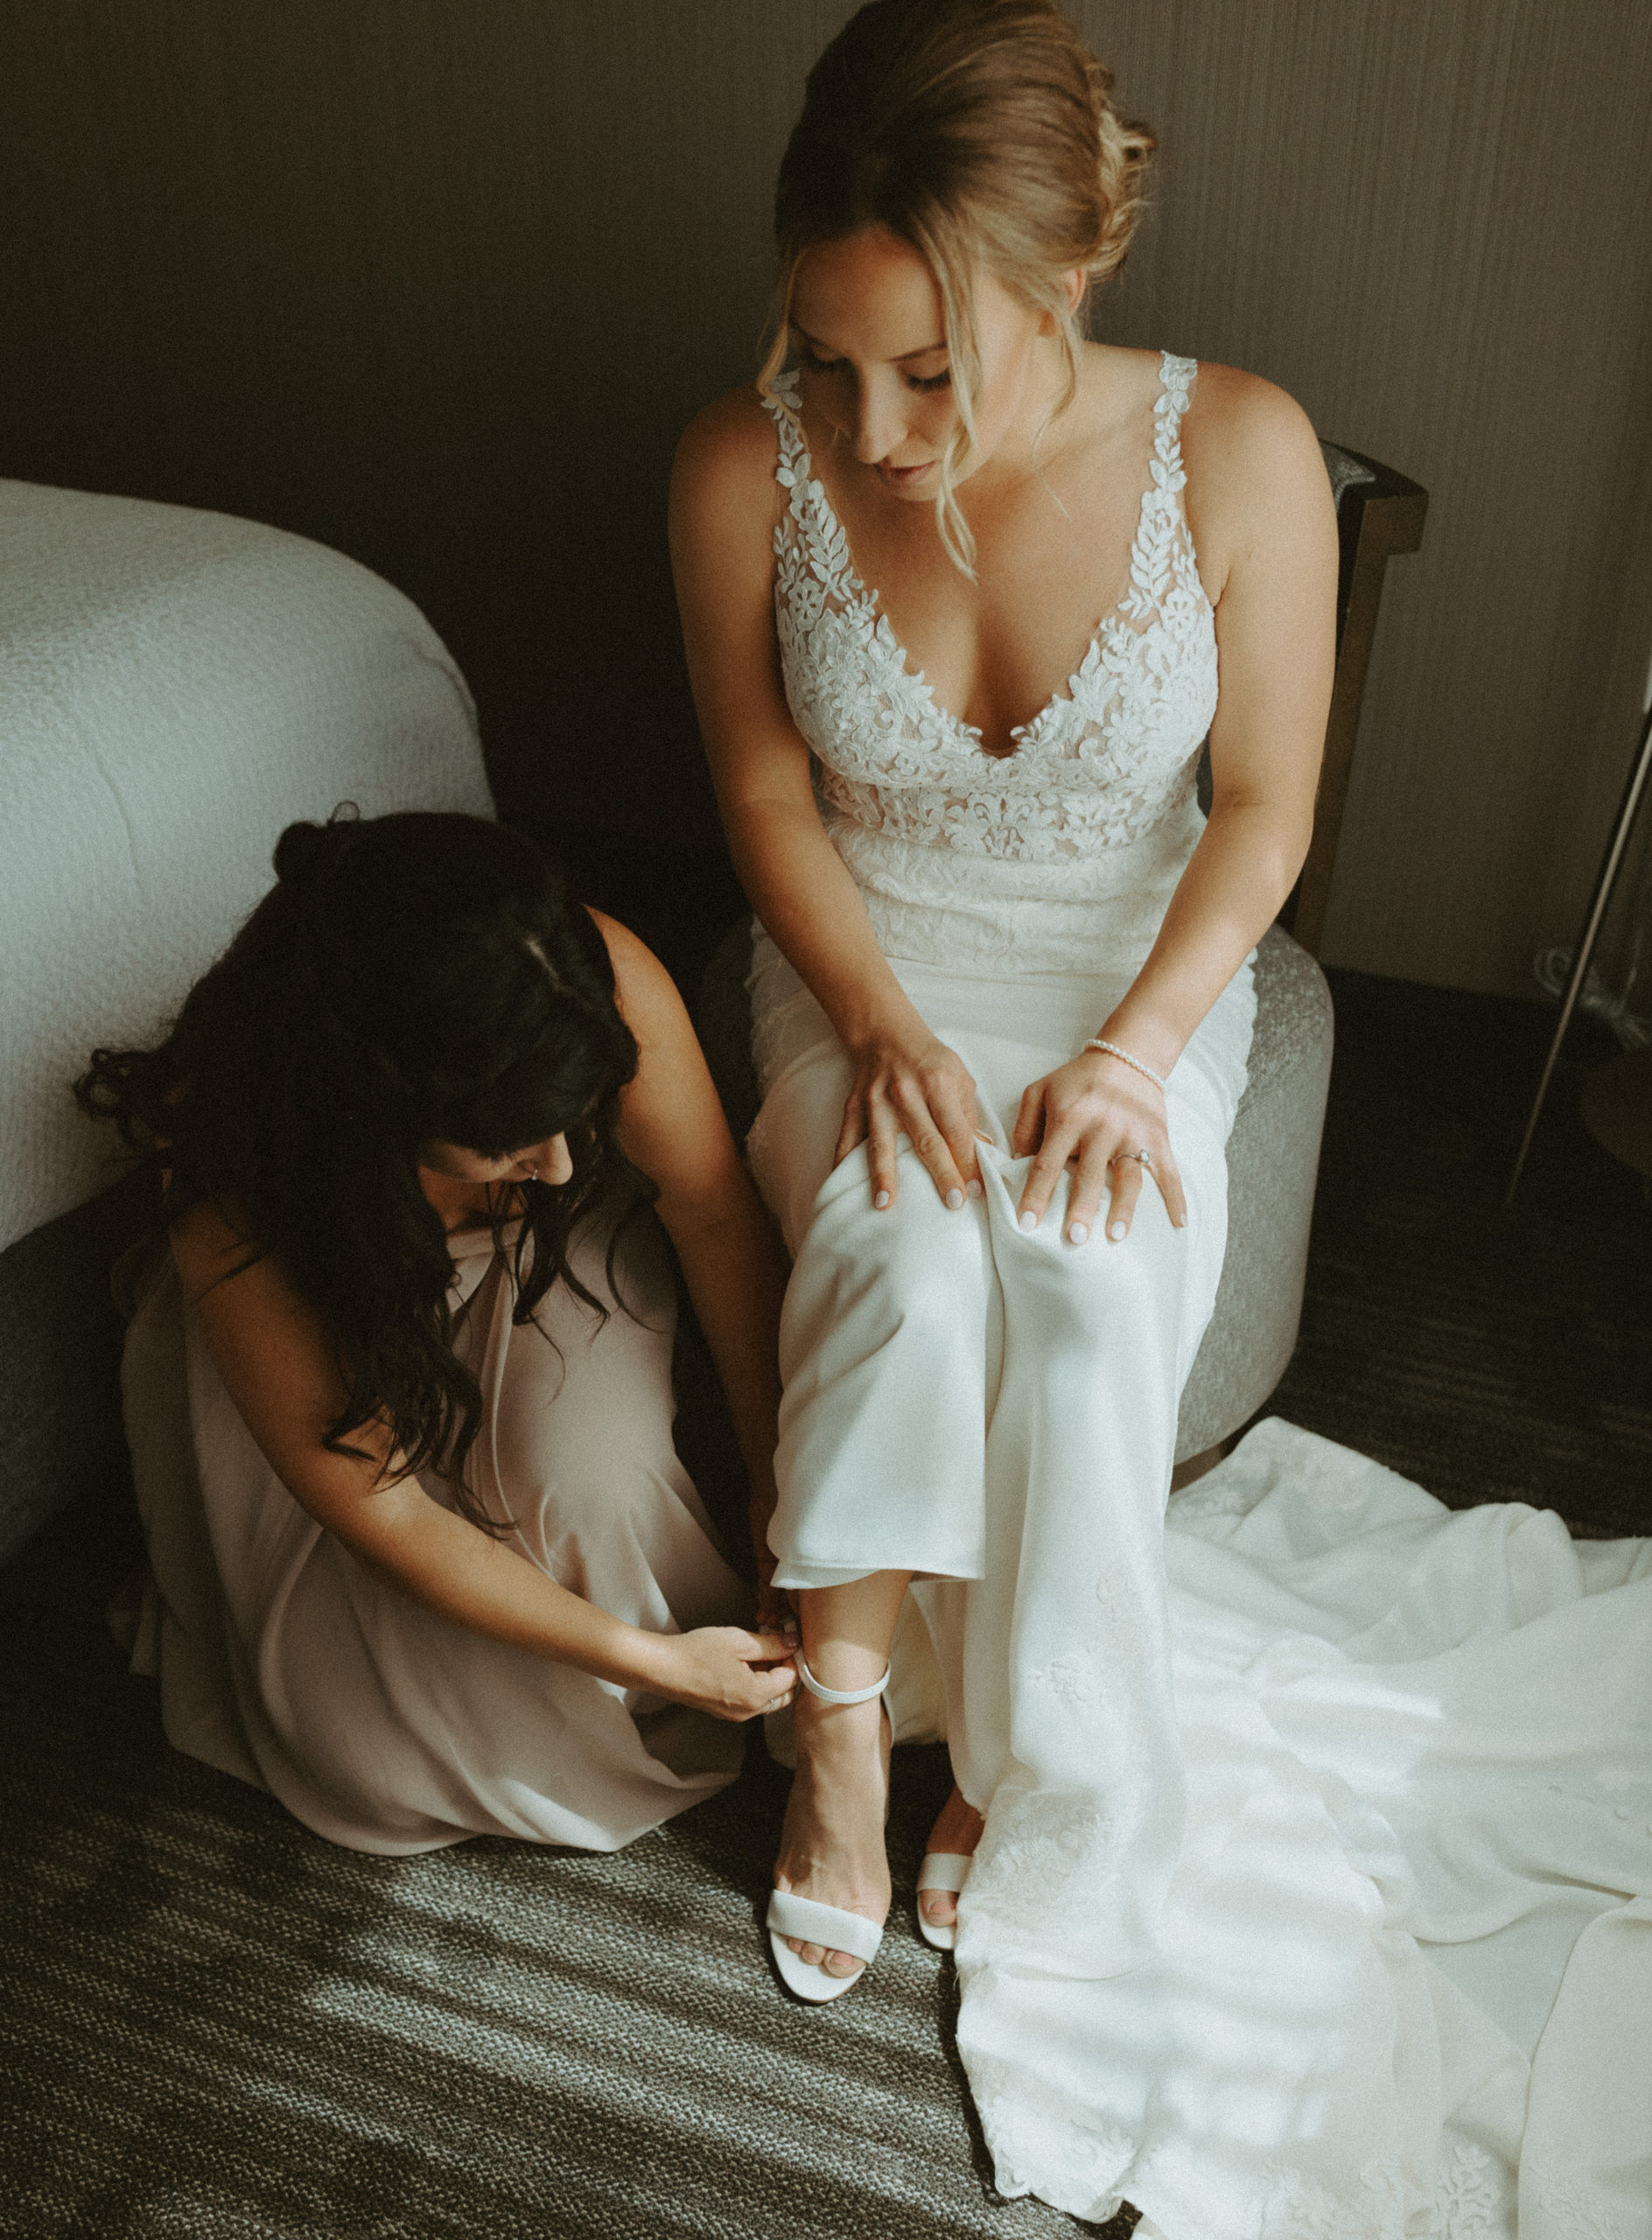 the bridesmaid putting on the bride's shoes